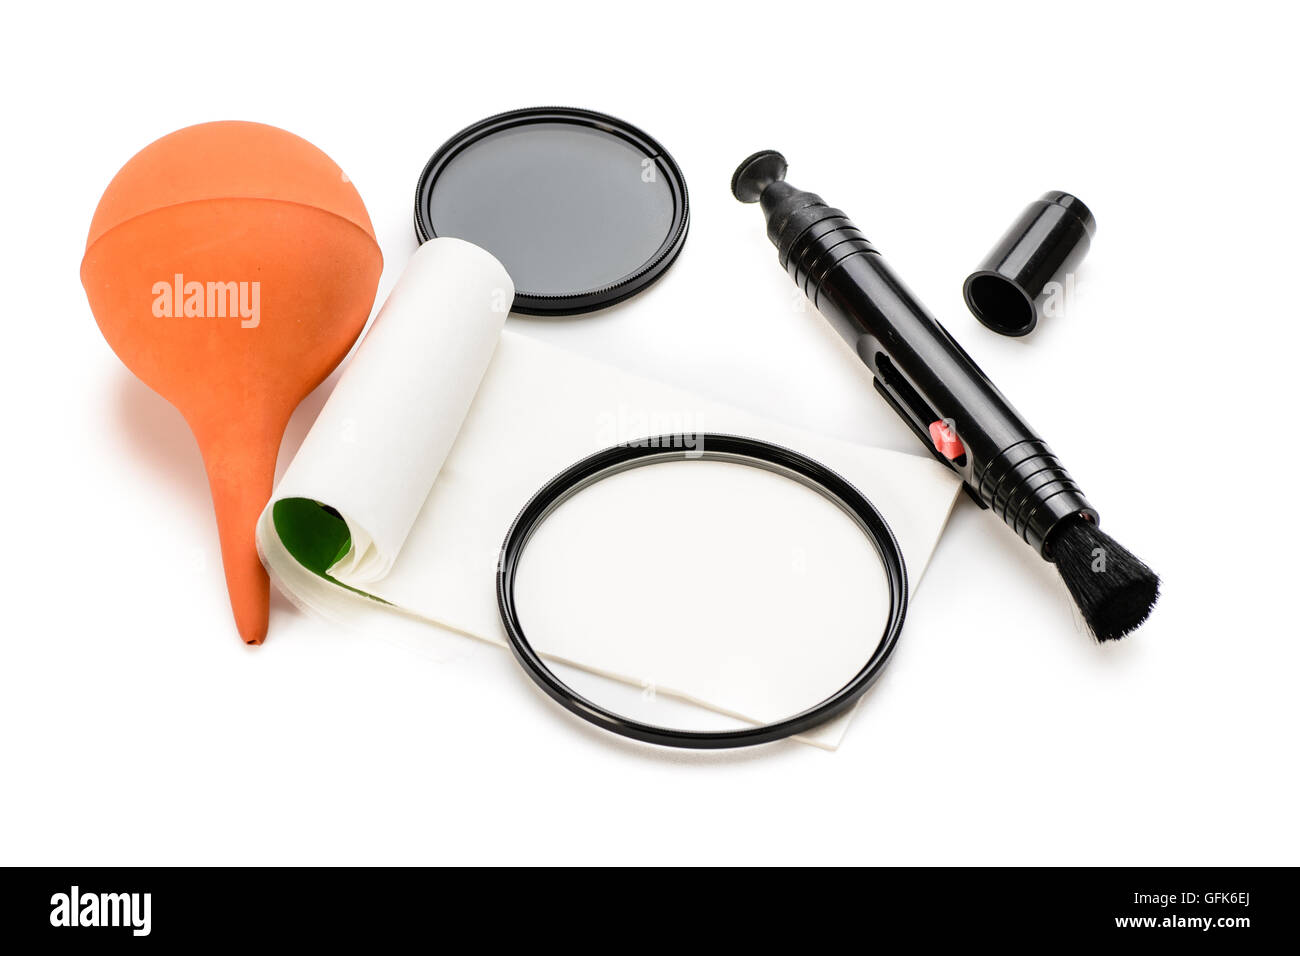 lens cleaning tools on the white background. Stock Photo